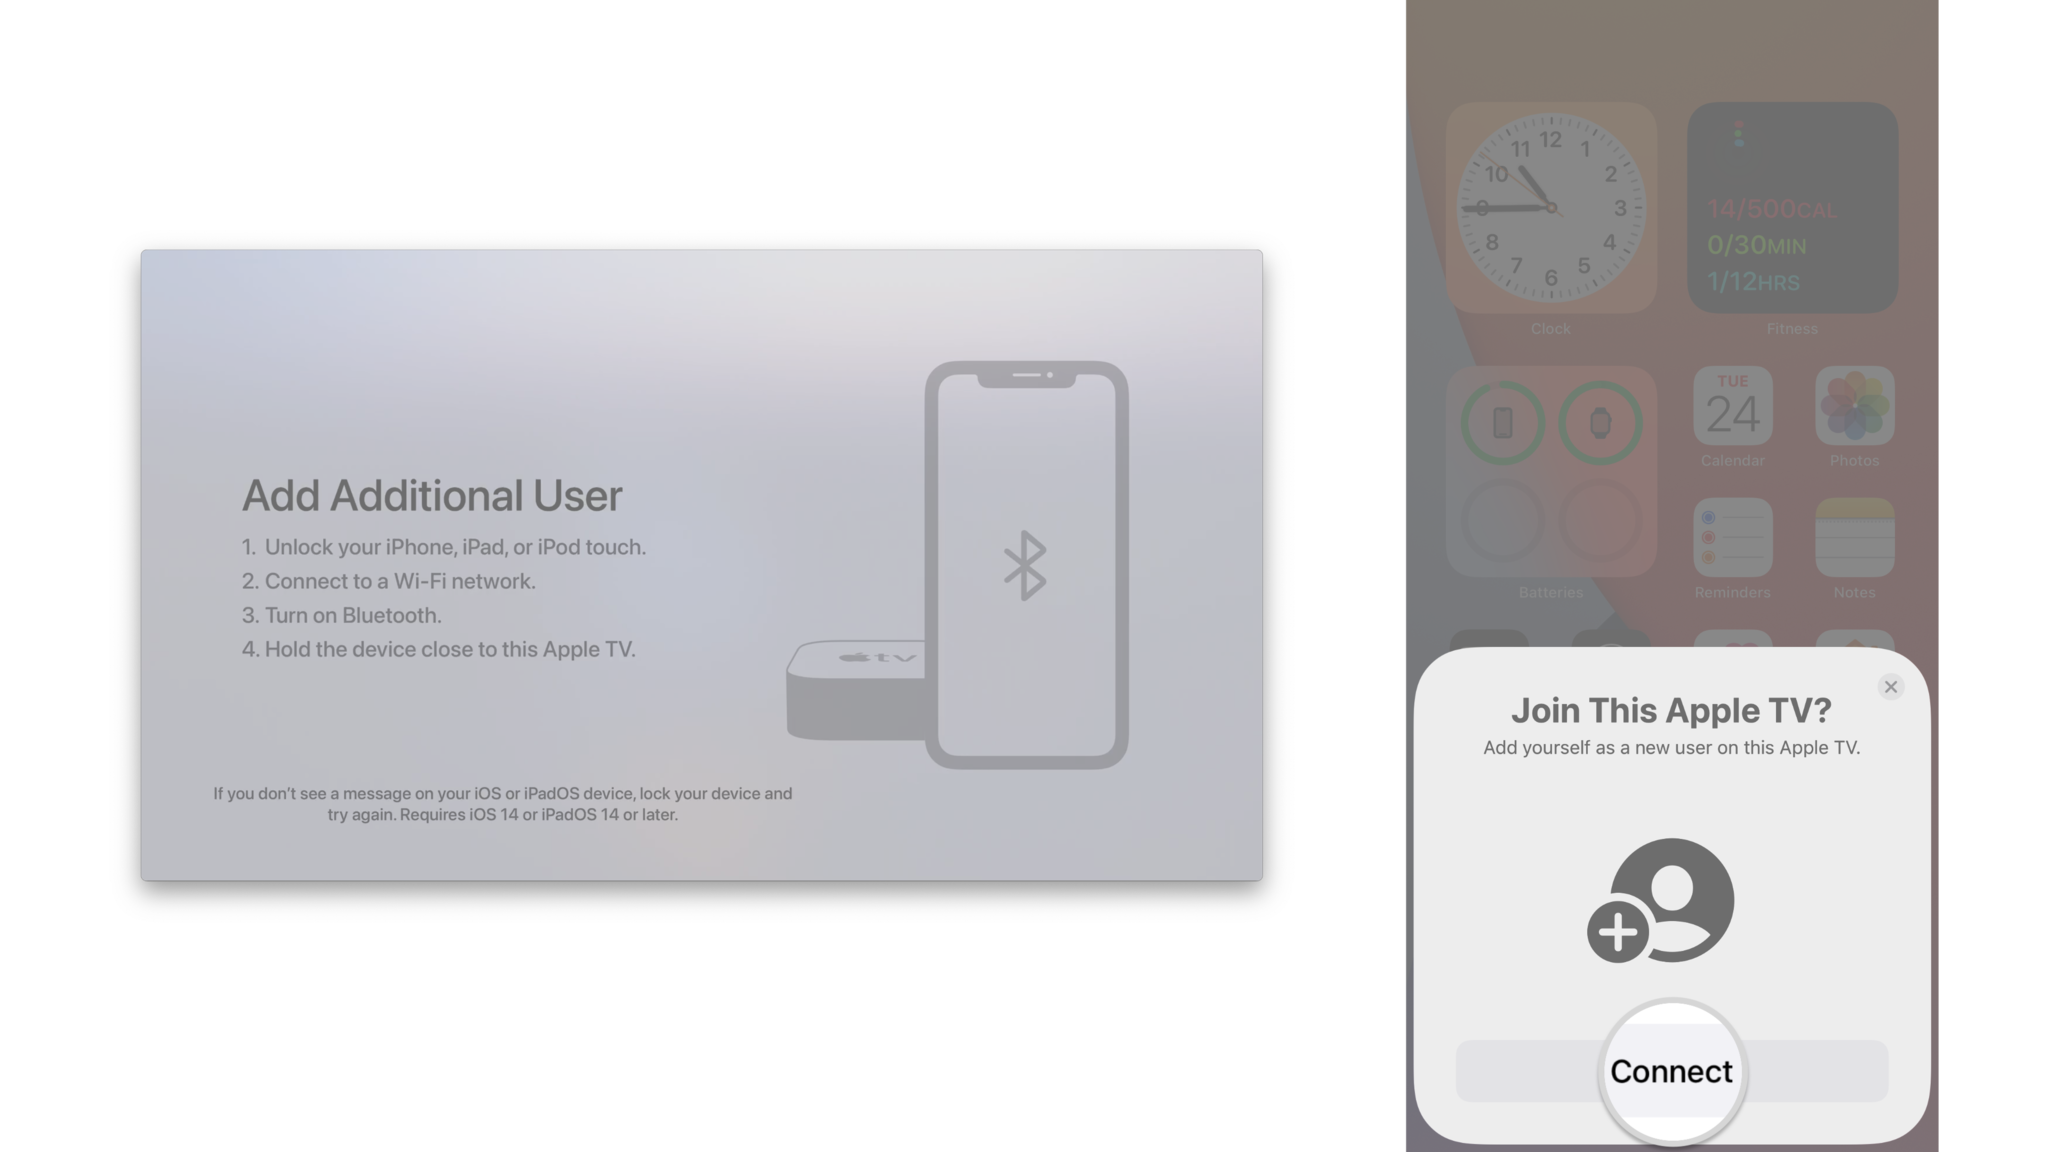 How to add a user on the Apple TV by showing steps: Bring your iPhone near your Apple TV and unlock, Tap Connect